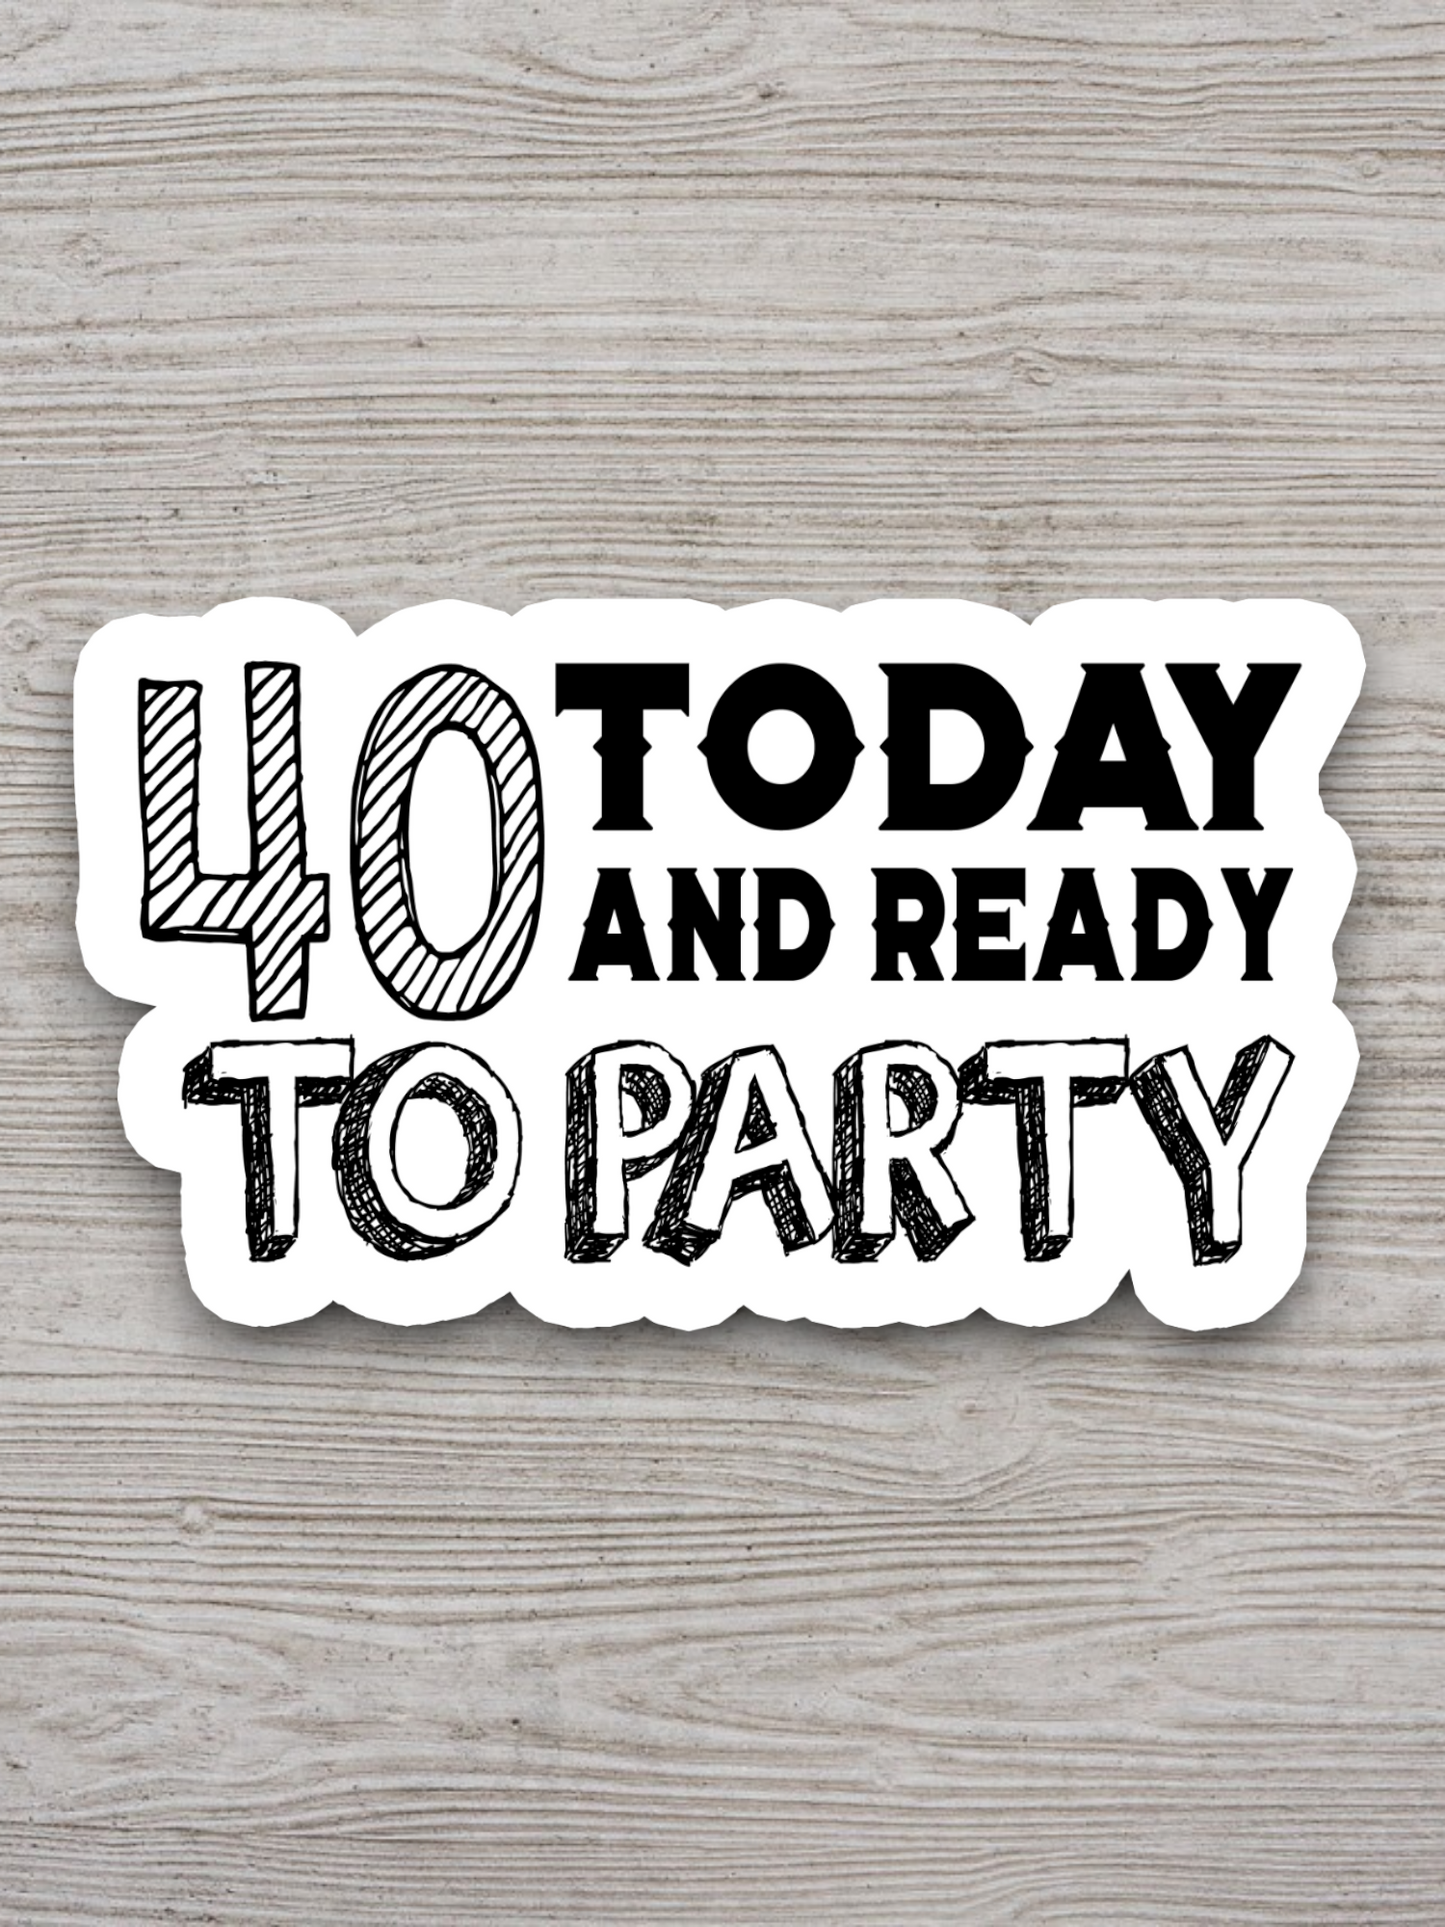 40 Today and Ready to Party Sticker